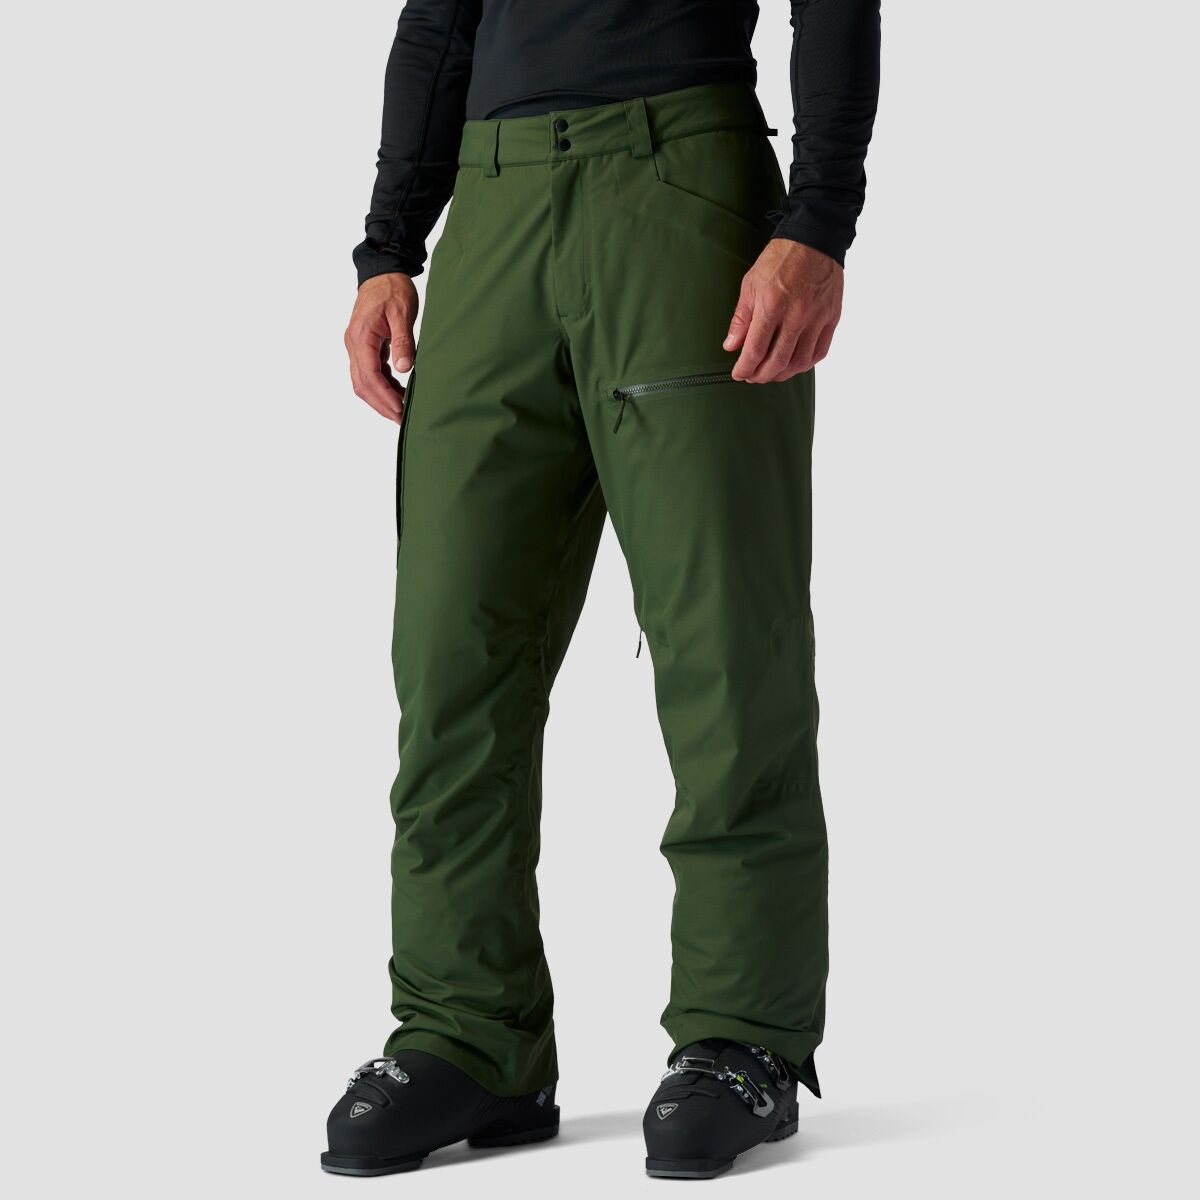 Stoic Insulated Snow Pant 2.0 - Men's